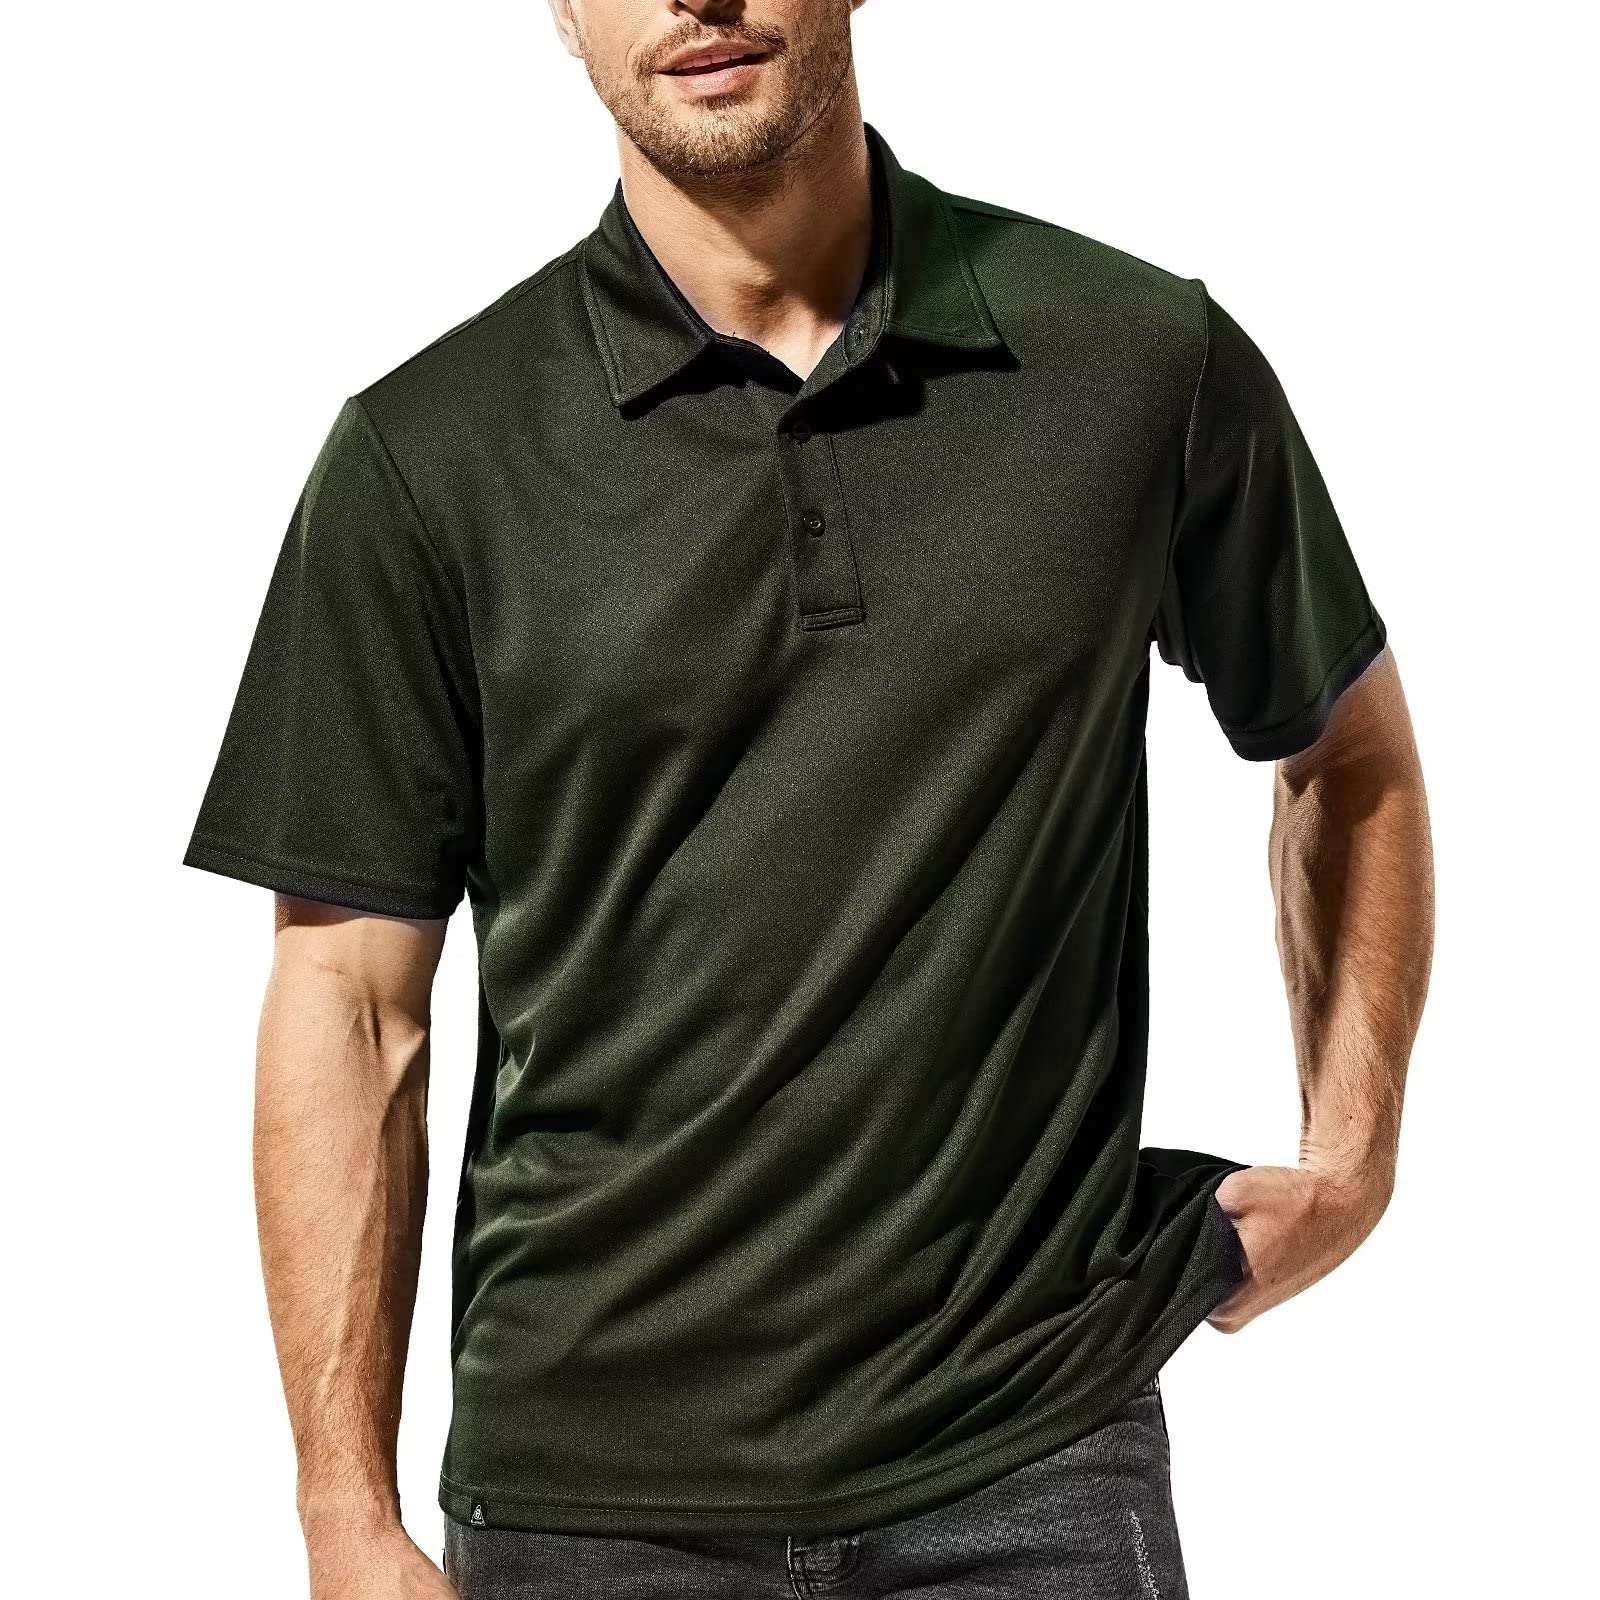 Haimont Polo Shirts for Men Dry Fit Collared Golf Shirts